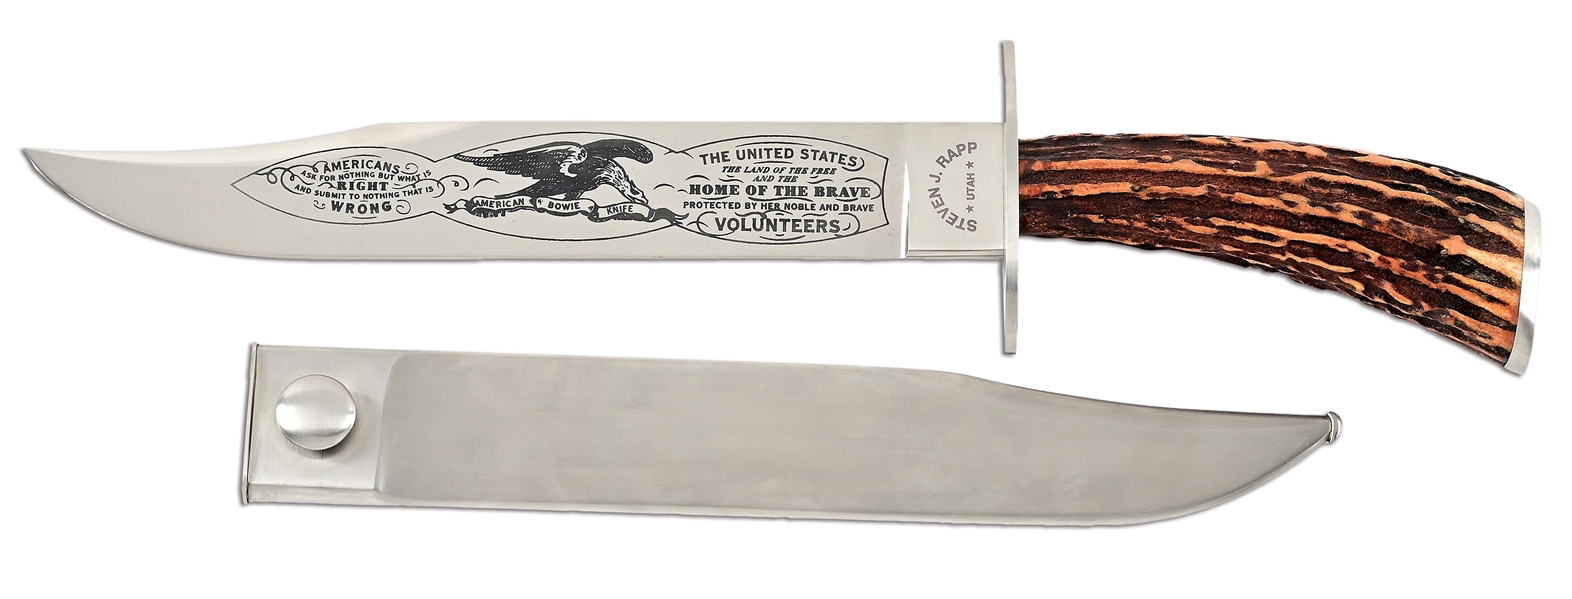 RAPP CUSTOM PATRIOTIC BOWIE KNIFE WITH STAG HANDLE.